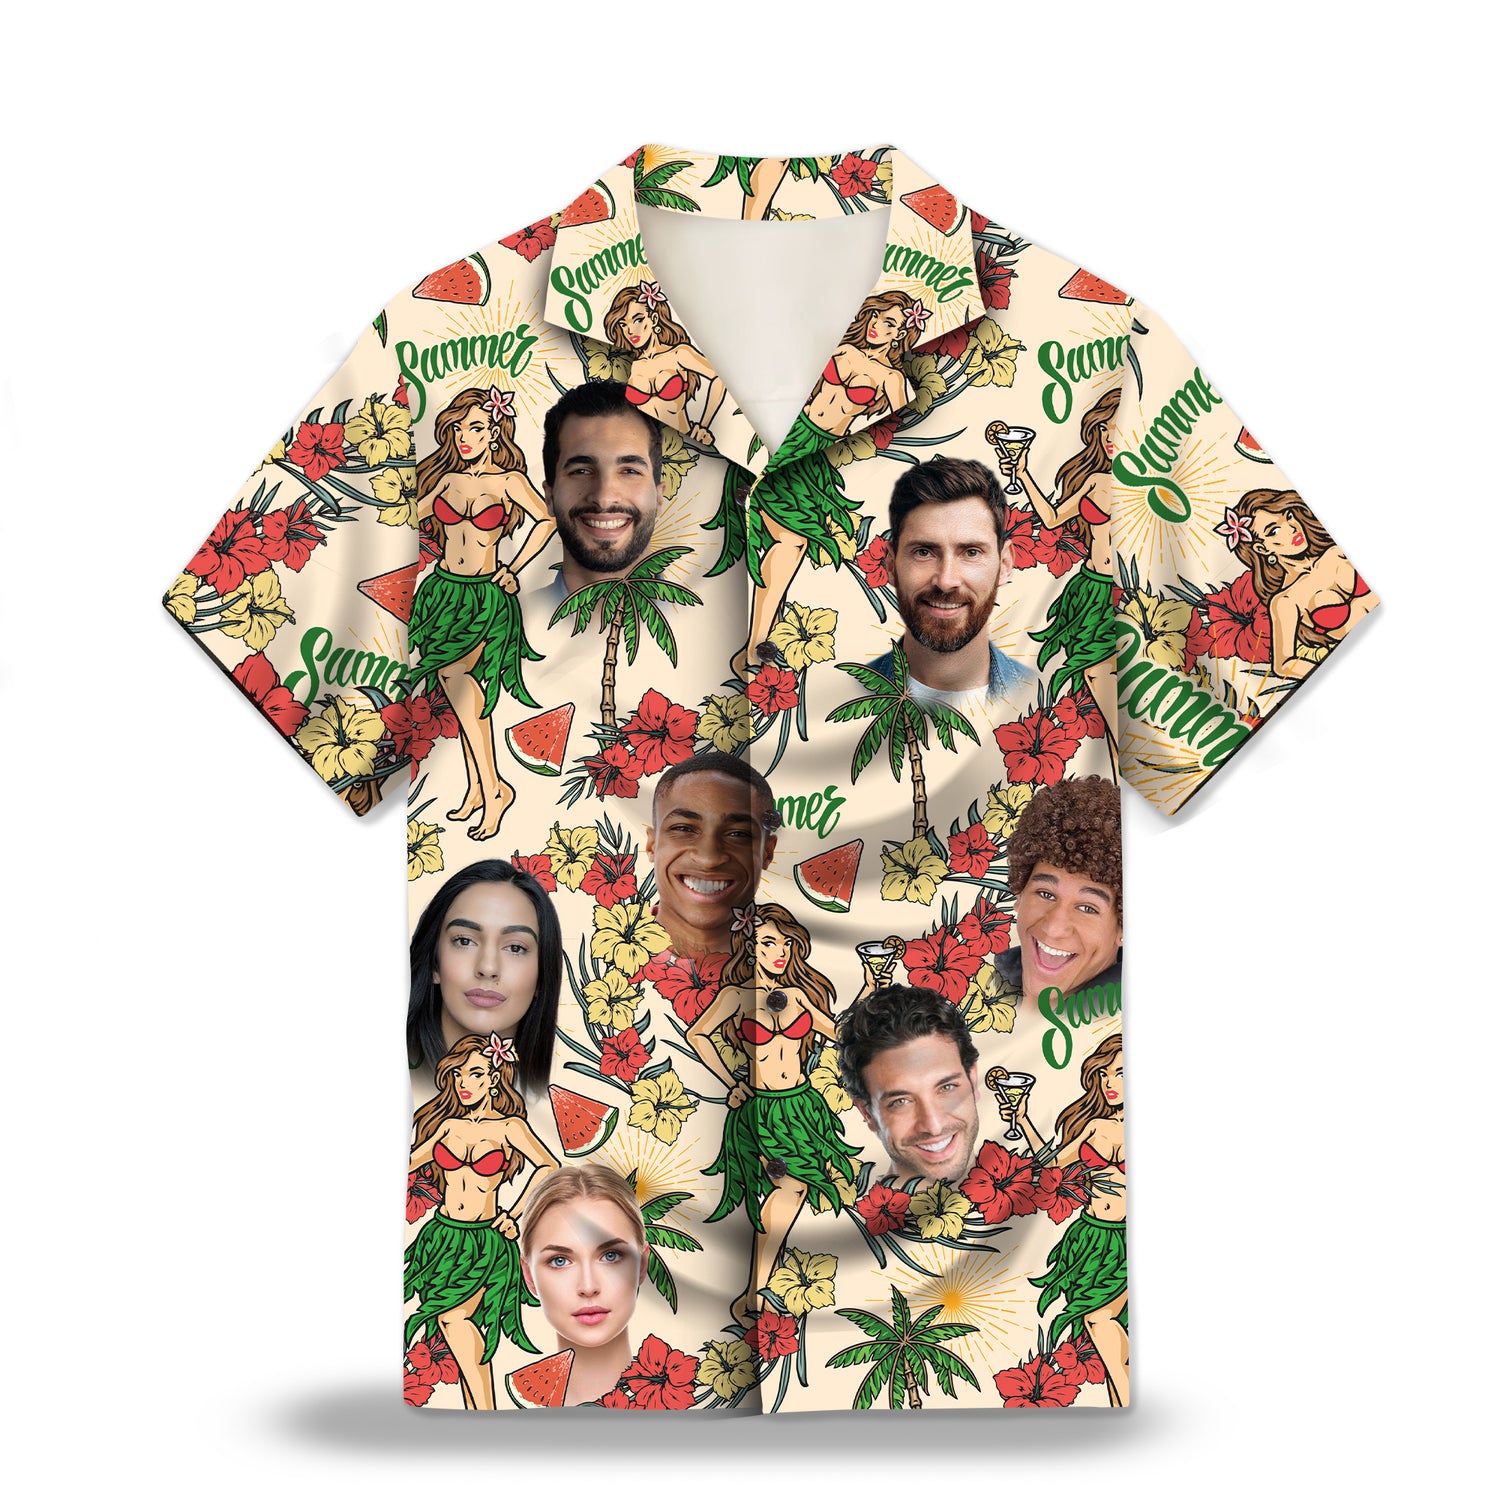 Image: Hawaiian Summer Party Custom Hawaiian Shirt. Featuring vibrant tropical designs perfect for summer parties, with hibiscus flowers, palm trees, Polynesian girls and beach elements. Alt text for accessibility.